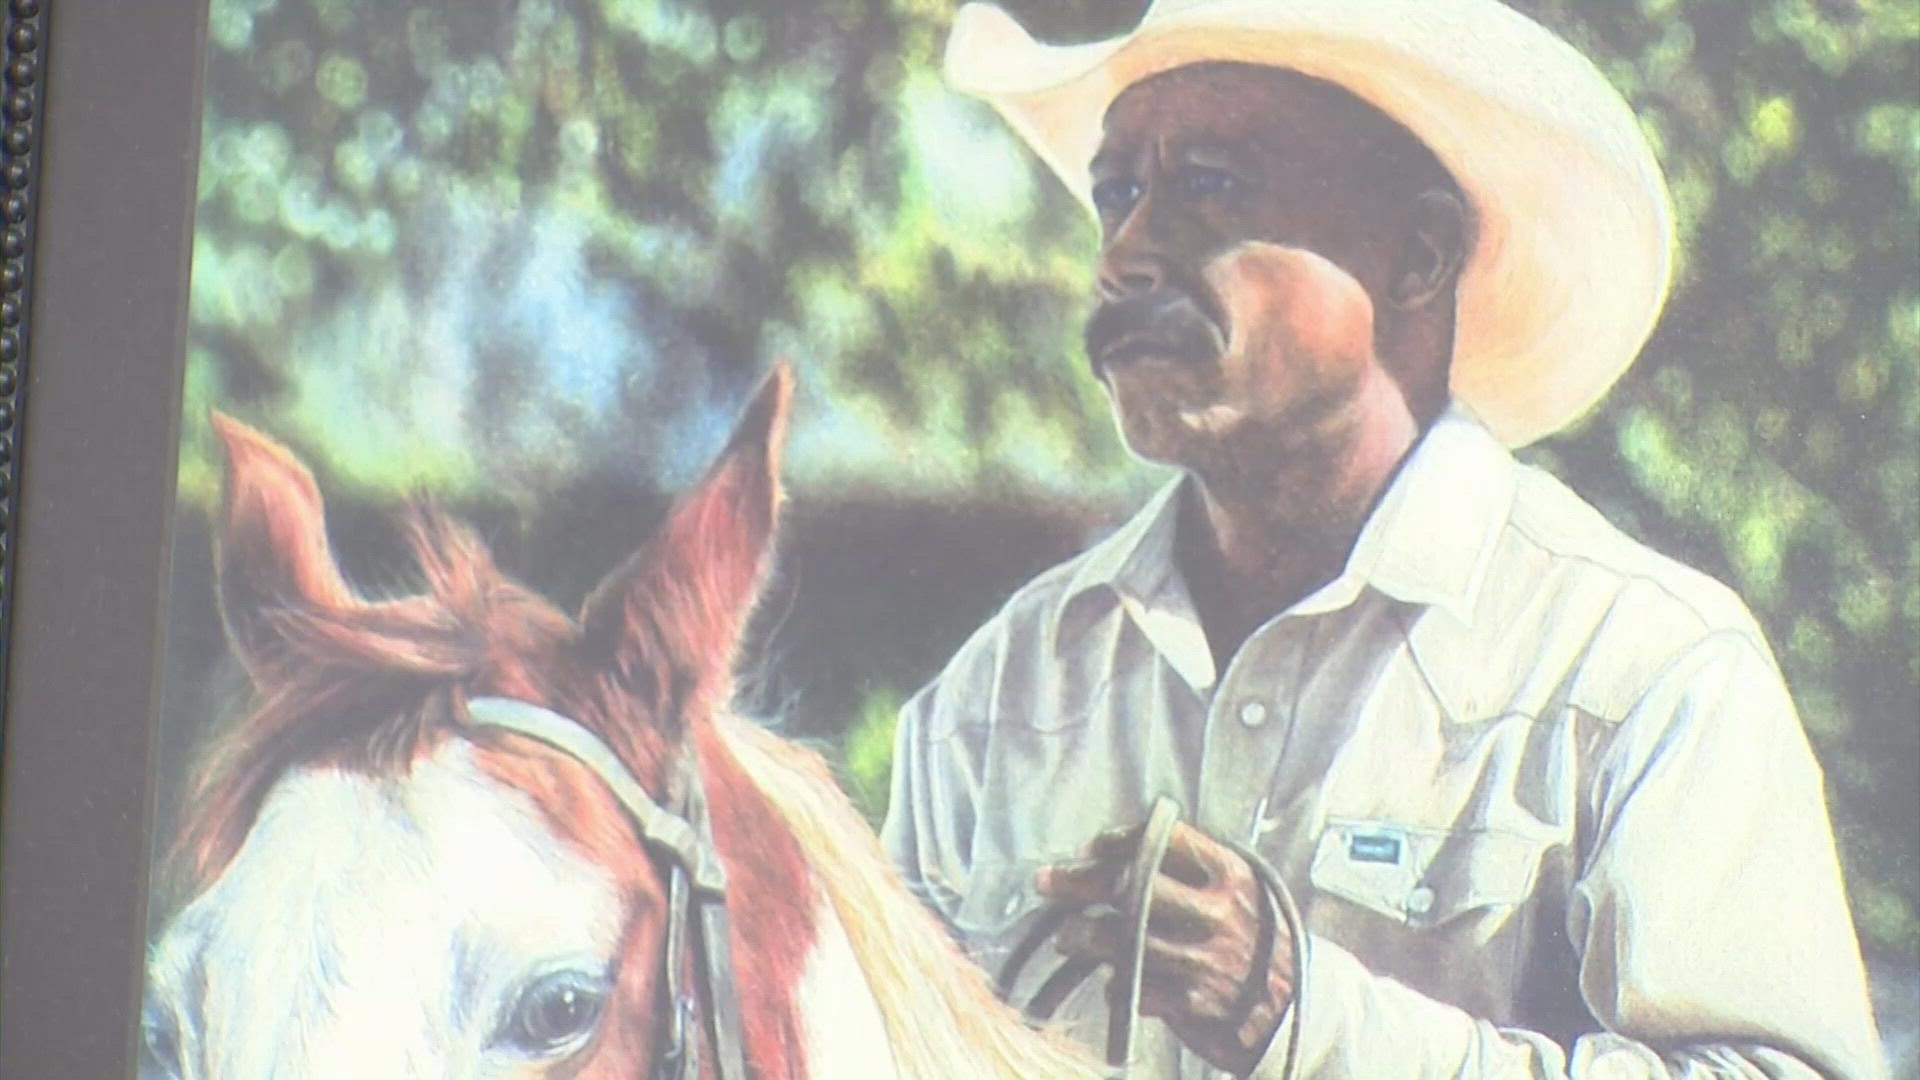 Black cowboys have a rich history but their stories often go untold. KHOU 11 reporter Brittany Ford introduces us to Larry Callies, a man working to change that.